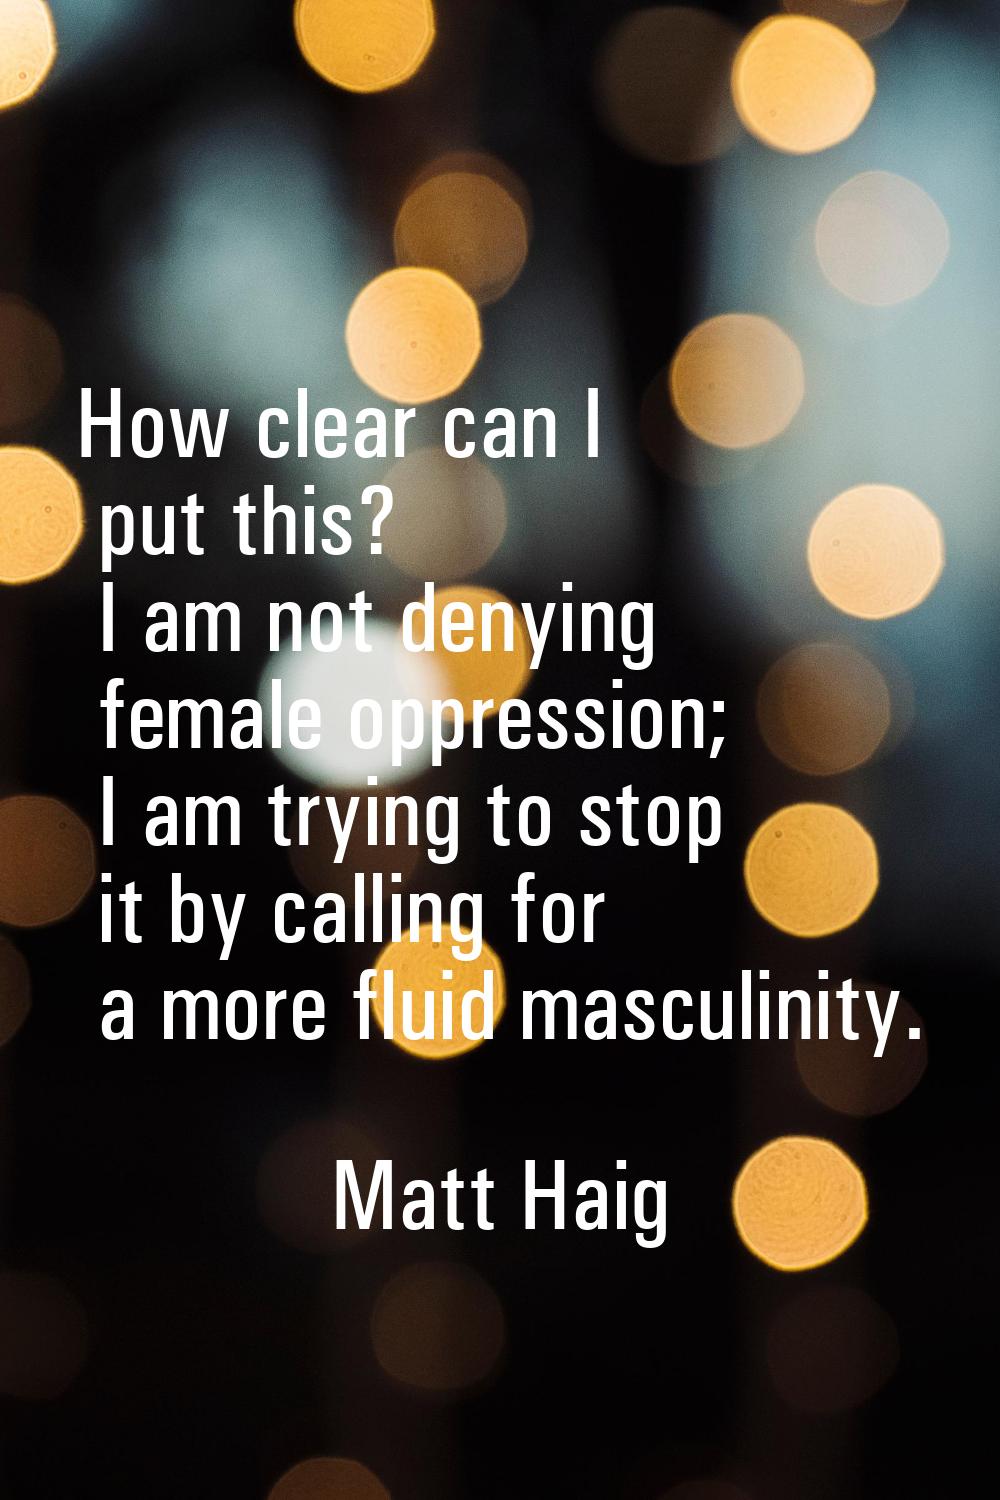 How clear can I put this? I am not denying female oppression; I am trying to stop it by calling for